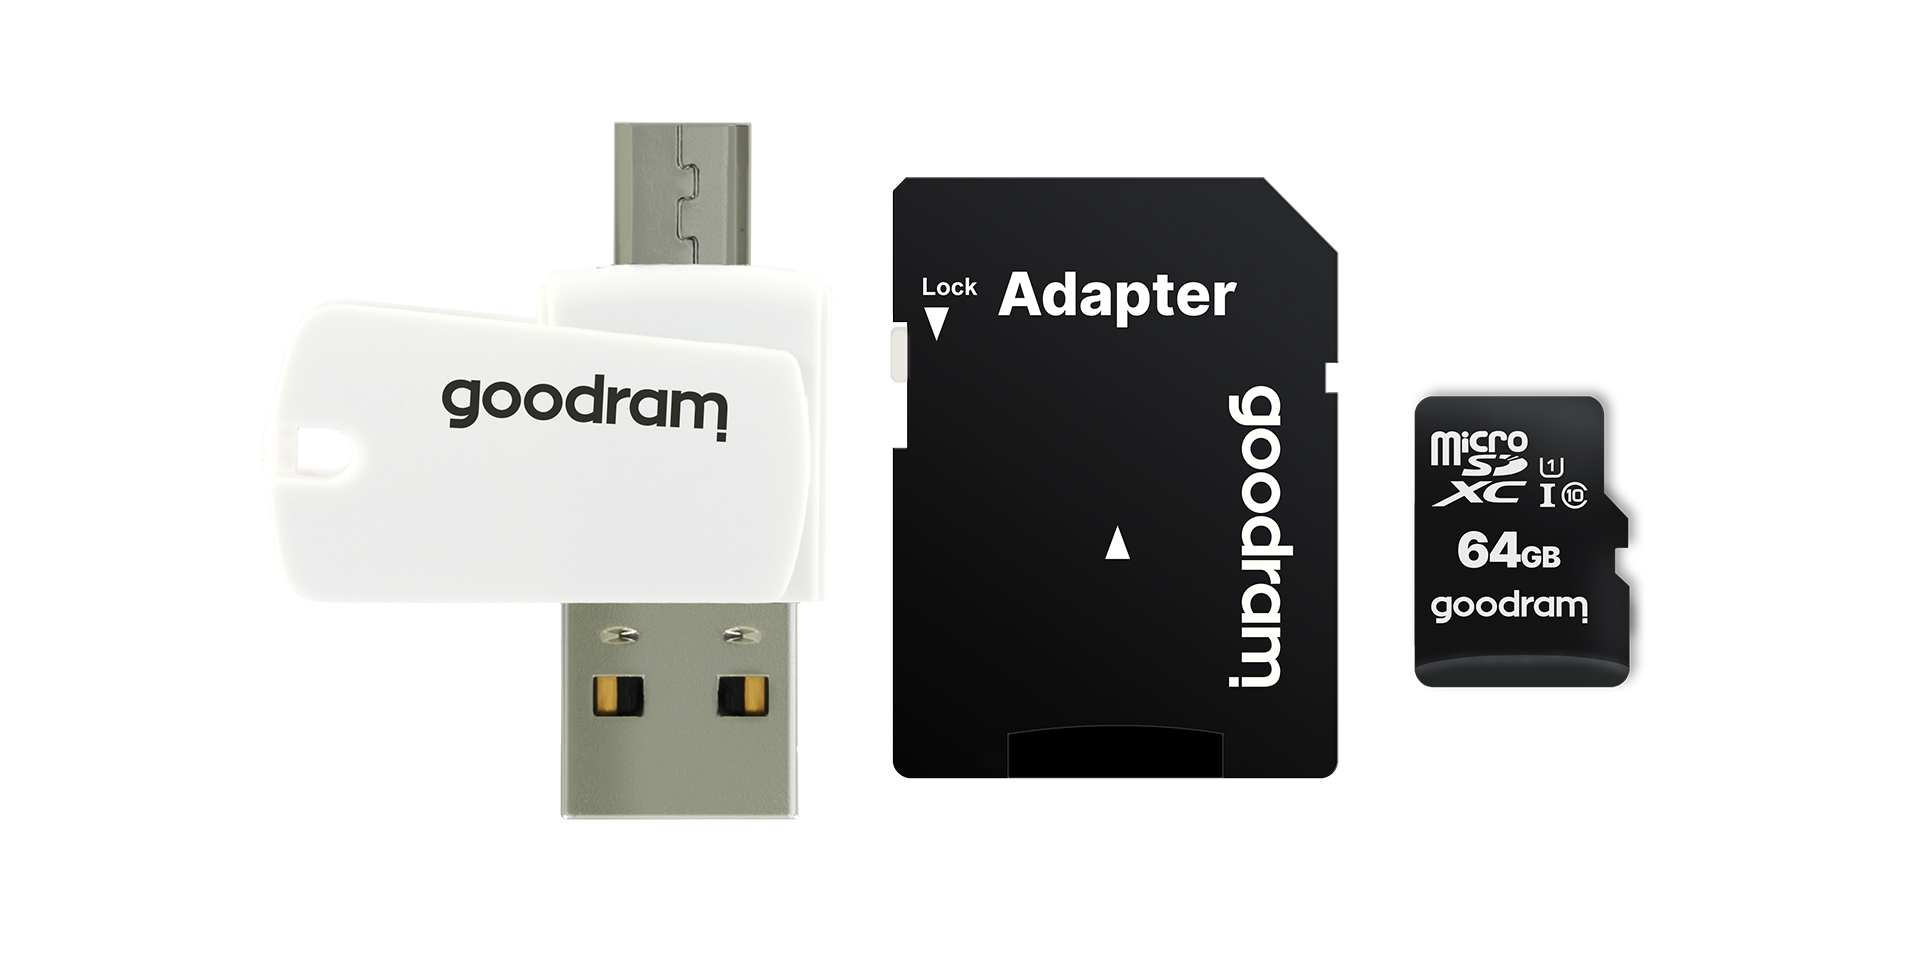 All in One 64GB MICRO CARD + card reader